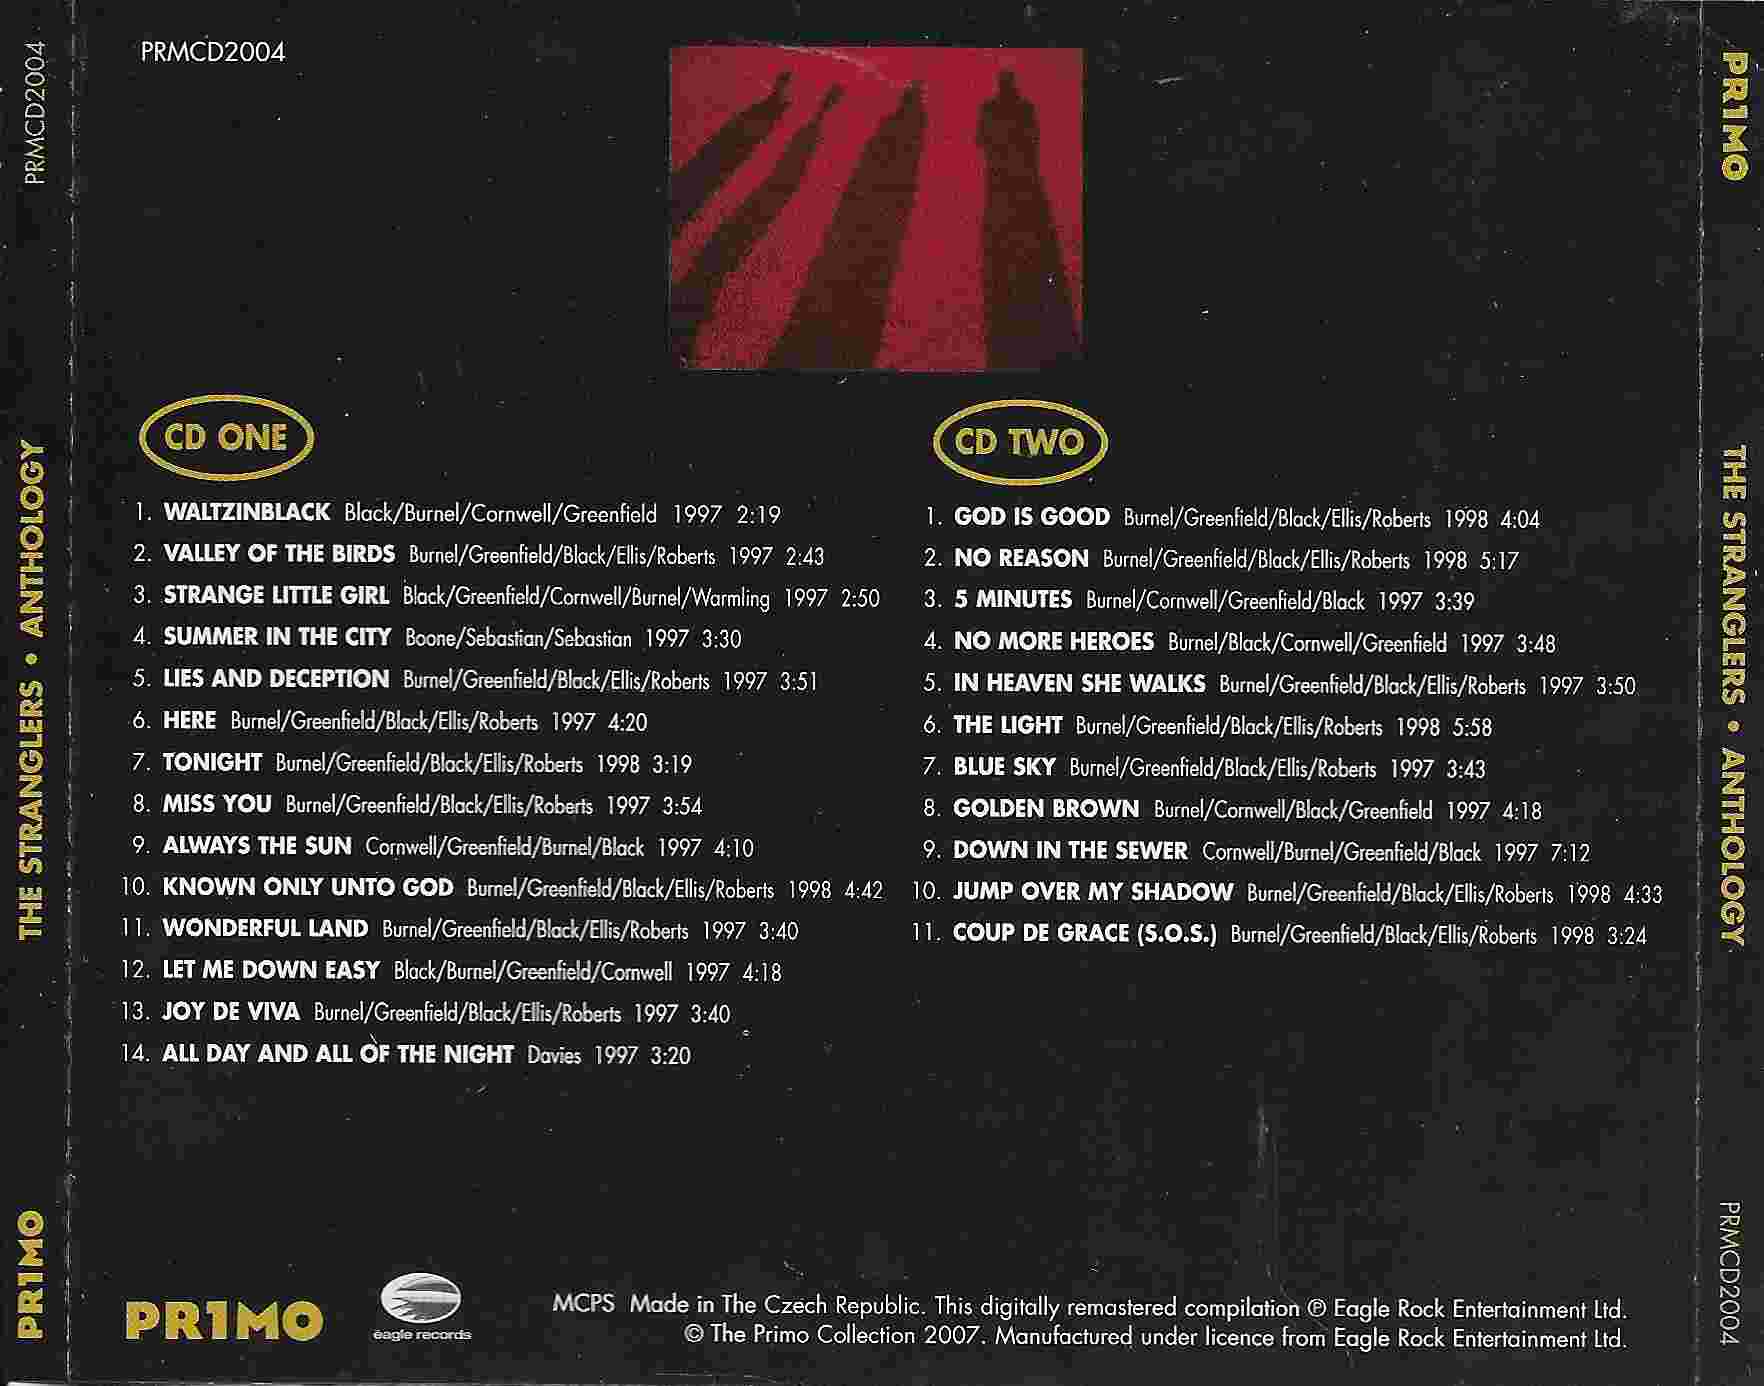 Middle of cover of PRMCD 2004